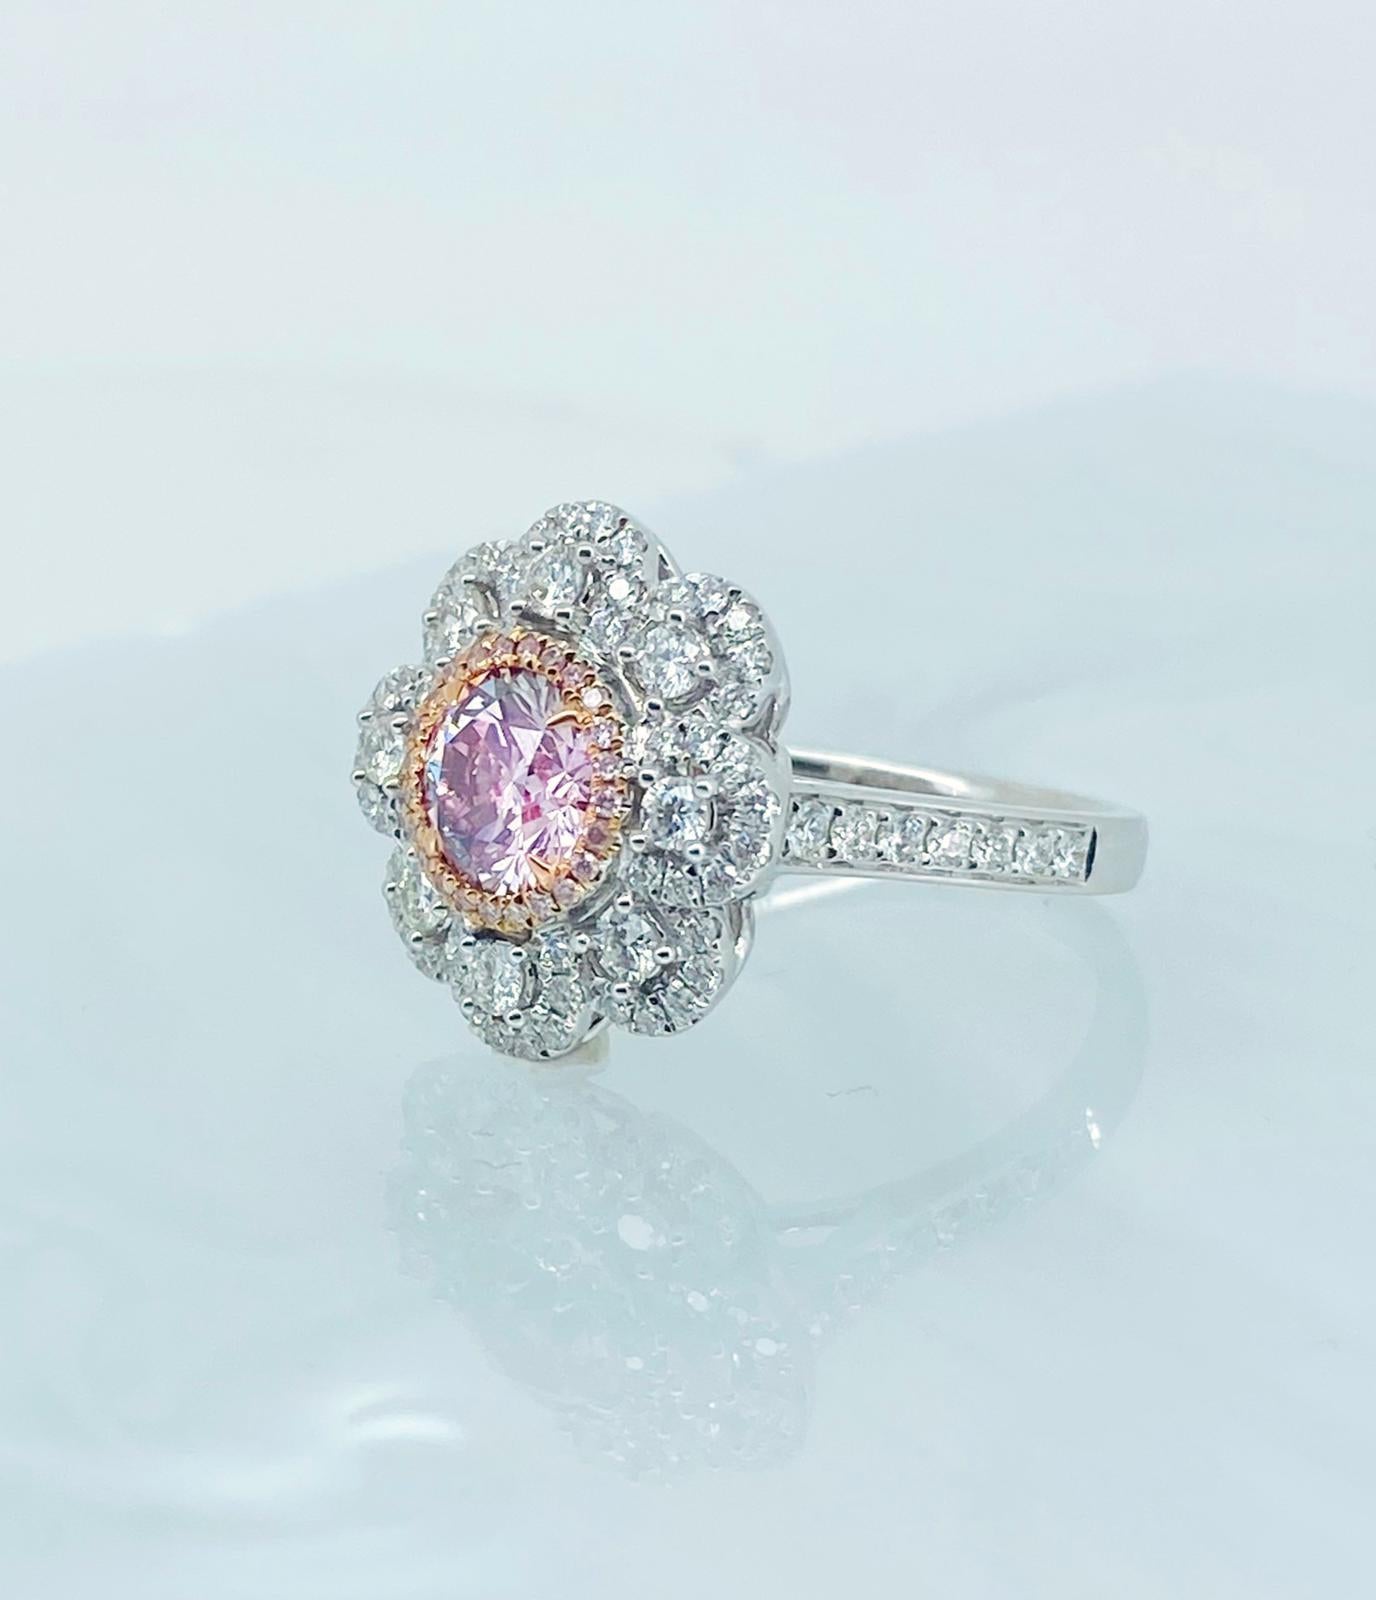 0.92 Carat Very Light Pink Diamond Ring VS2 Clarity GIA Certified For Sale 1